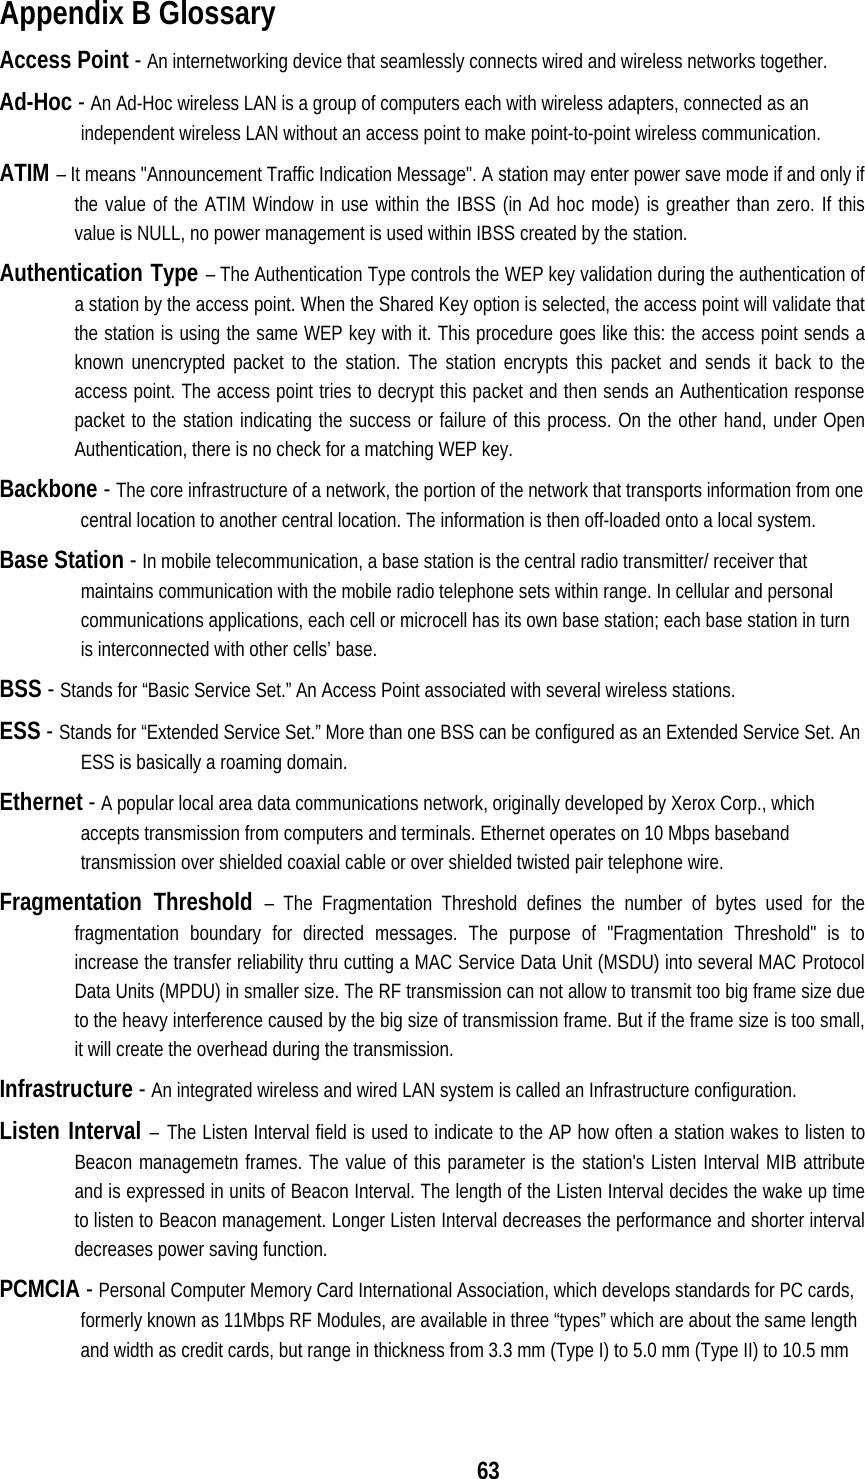  63Appendix B Glossary Access Point - An internetworking device that seamlessly connects wired and wireless networks together. Ad-Hoc - An Ad-Hoc wireless LAN is a group of computers each with wireless adapters, connected as an independent wireless LAN without an access point to make point-to-point wireless communication. ATIM – It means &quot;Announcement Traffic Indication Message&quot;. A station may enter power save mode if and only if the value of the ATIM Window in use within the IBSS (in Ad hoc mode) is greather than zero. If this value is NULL, no power management is used within IBSS created by the station. Authentication Type – The Authentication Type controls the WEP key validation during the authentication of a station by the access point. When the Shared Key option is selected, the access point will validate that the station is using the same WEP key with it. This procedure goes like this: the access point sends a known unencrypted packet to the station. The station encrypts this packet and sends it back to the access point. The access point tries to decrypt this packet and then sends an Authentication response packet to the station indicating the success or failure of this process. On the other hand, under Open Authentication, there is no check for a matching WEP key. Backbone - The core infrastructure of a network, the portion of the network that transports information from one central location to another central location. The information is then off-loaded onto a local system. Base Station - In mobile telecommunication, a base station is the central radio transmitter/ receiver that maintains communication with the mobile radio telephone sets within range. In cellular and personal communications applications, each cell or microcell has its own base station; each base station in turn is interconnected with other cells’ base. BSS - Stands for “Basic Service Set.” An Access Point associated with several wireless stations. ESS - Stands for “Extended Service Set.” More than one BSS can be configured as an Extended Service Set. An ESS is basically a roaming domain. Ethernet - A popular local area data communications network, originally developed by Xerox Corp., which accepts transmission from computers and terminals. Ethernet operates on 10 Mbps baseband transmission over shielded coaxial cable or over shielded twisted pair telephone wire. Fragmentation Threshold – The Fragmentation Threshold defines the number of bytes used for the fragmentation boundary for directed messages. The purpose of &quot;Fragmentation Threshold&quot; is to    increase the transfer reliability thru cutting a MAC Service Data Unit (MSDU) into several MAC Protocol Data Units (MPDU) in smaller size. The RF transmission can not allow to transmit too big frame size due to the heavy interference caused by the big size of transmission frame. But if the frame size is too small, it will create the overhead during the transmission. Infrastructure - An integrated wireless and wired LAN system is called an Infrastructure configuration. Listen Interval – The Listen Interval field is used to indicate to the AP how often a station wakes to listen to Beacon managemetn frames. The value of this parameter is the station&apos;s Listen Interval MIB attribute and is expressed in units of Beacon Interval. The length of the Listen Interval decides the wake up time to listen to Beacon management. Longer Listen Interval decreases the performance and shorter interval decreases power saving function. PCMCIA - Personal Computer Memory Card International Association, which develops standards for PC cards, formerly known as 11Mbps RF Modules, are available in three “types” which are about the same length and width as credit cards, but range in thickness from 3.3 mm (Type I) to 5.0 mm (Type II) to 10.5 mm 